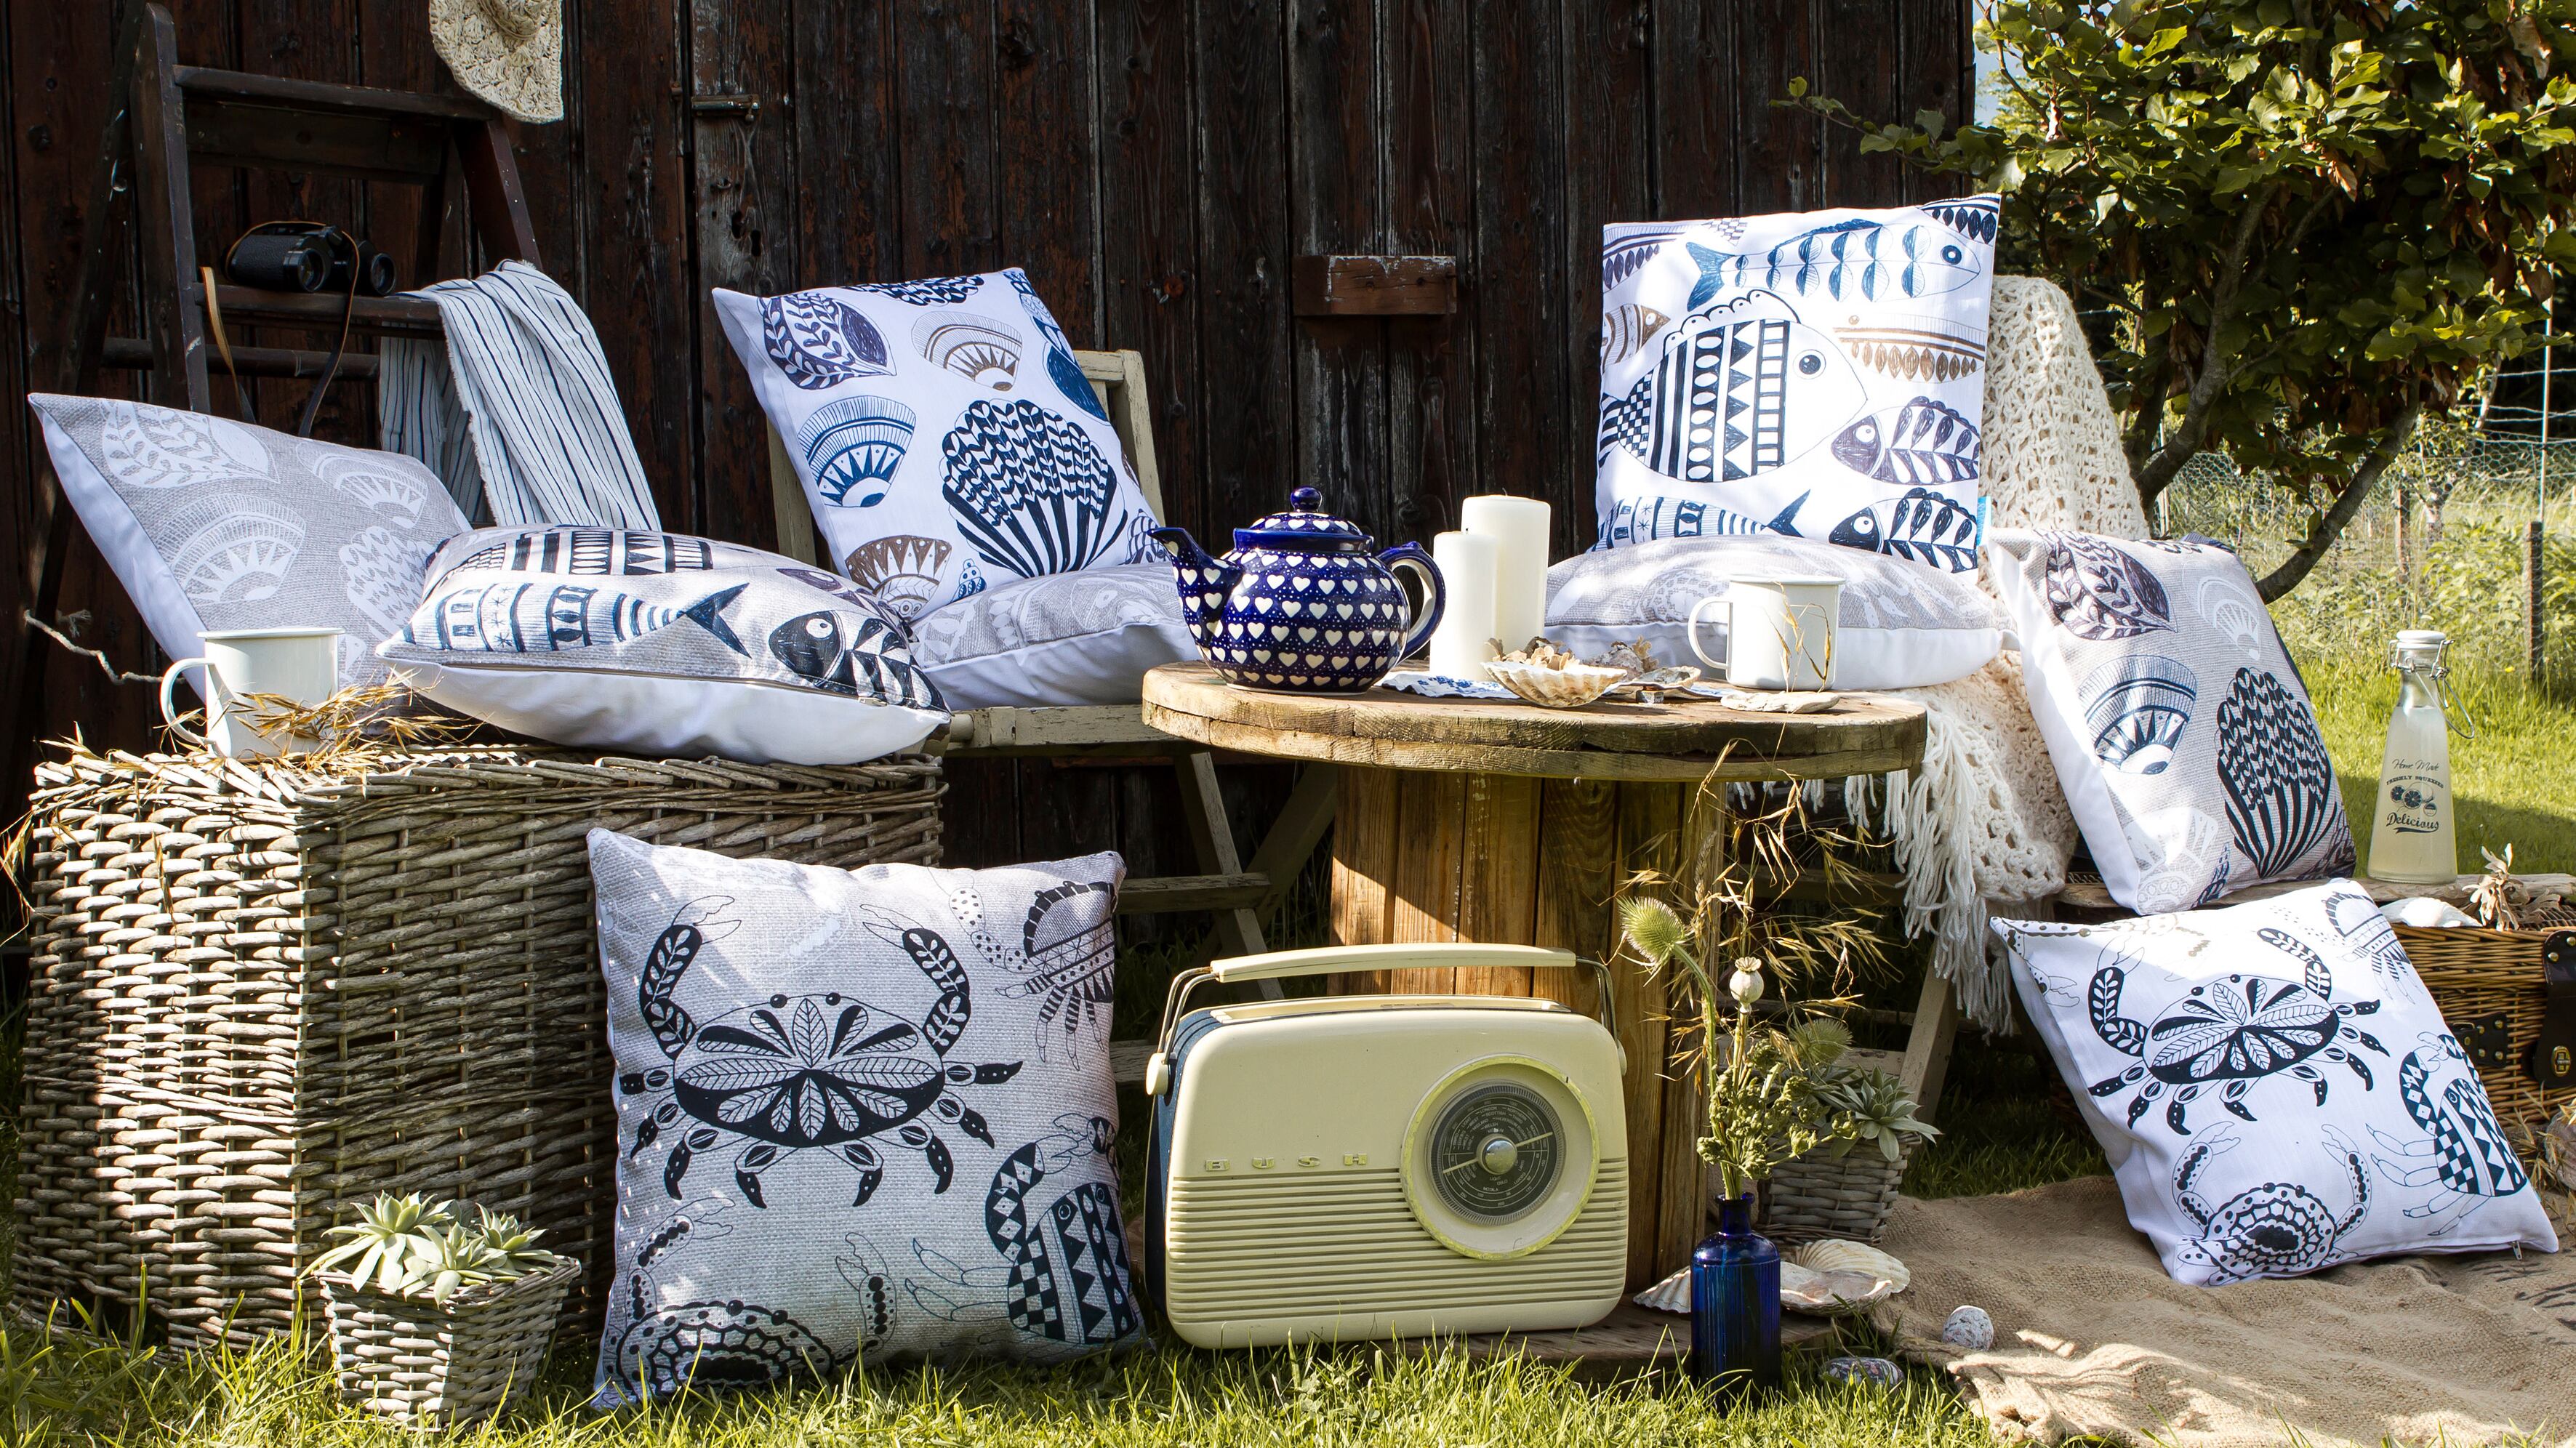 Time to channel your inner beachcomber with these seaside themed accessories